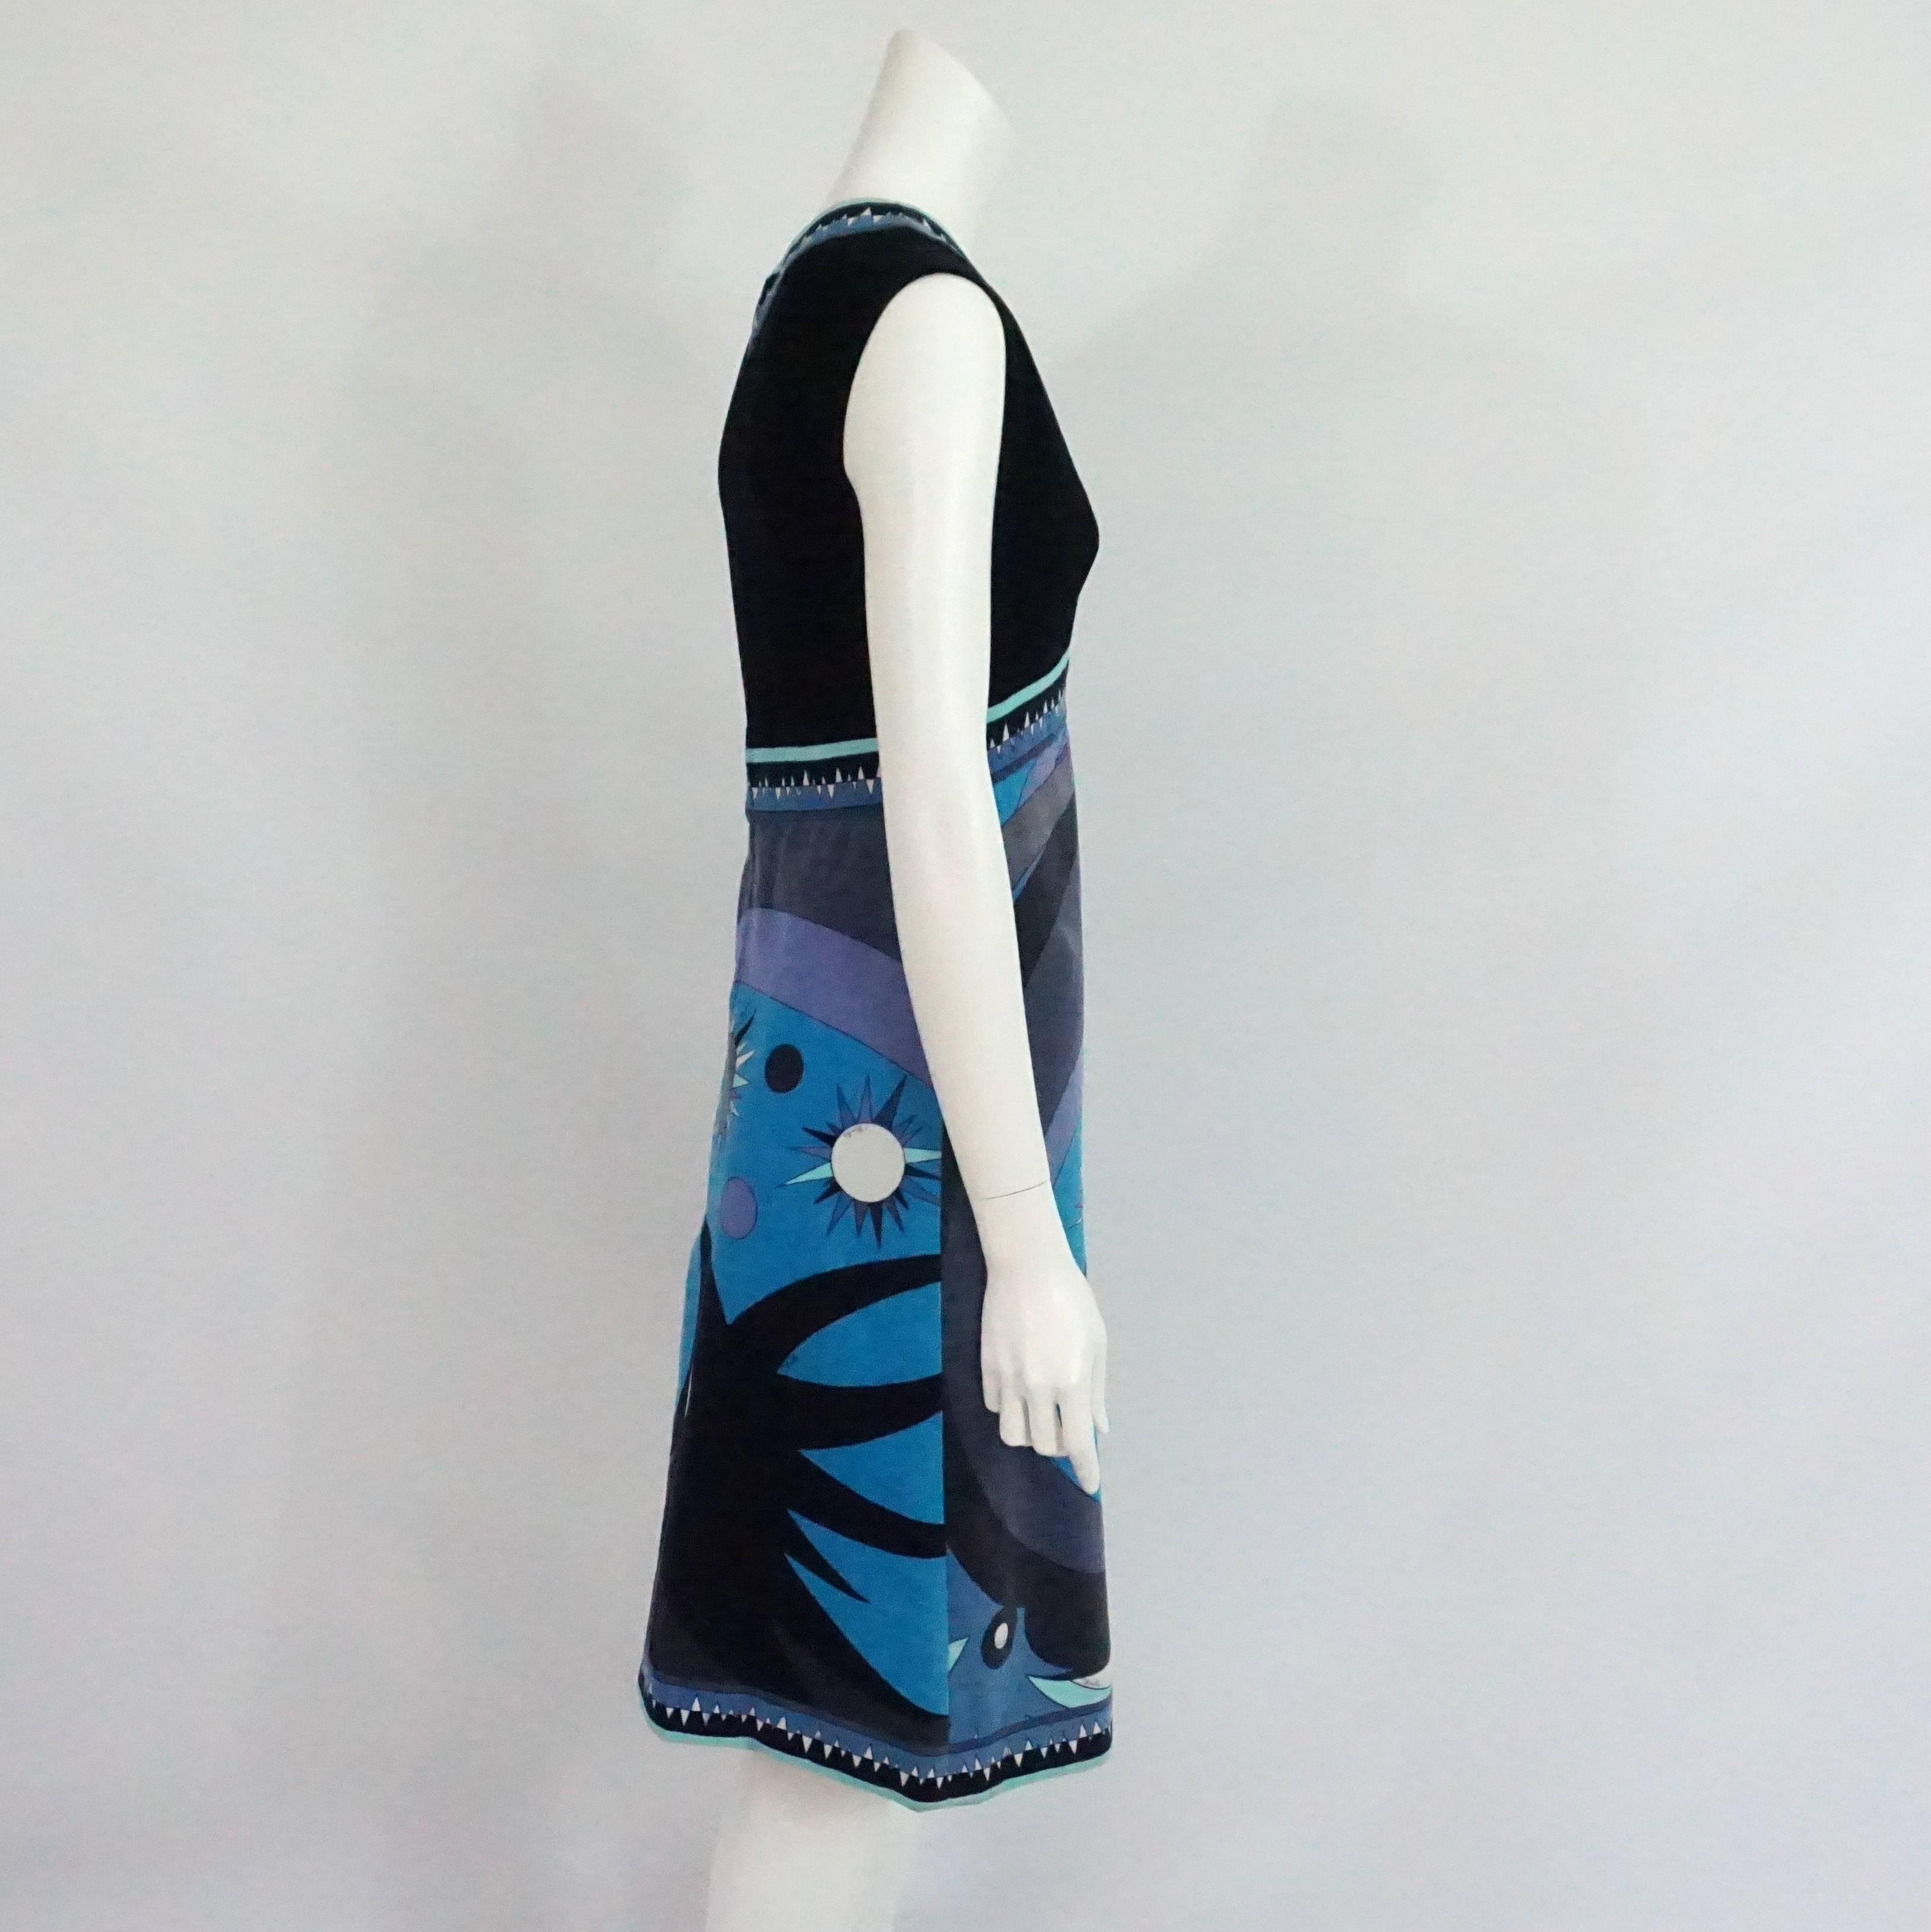 Emilio Pucci Navy & Blue Velvet Sleeveless Printed Dress - 10 - 1960's. This fabulous dress is an amazing vintage find. It features a v-neck, back zipper, navy solid bust, and an abstract large print on bottom. The dress is in excellent vintage